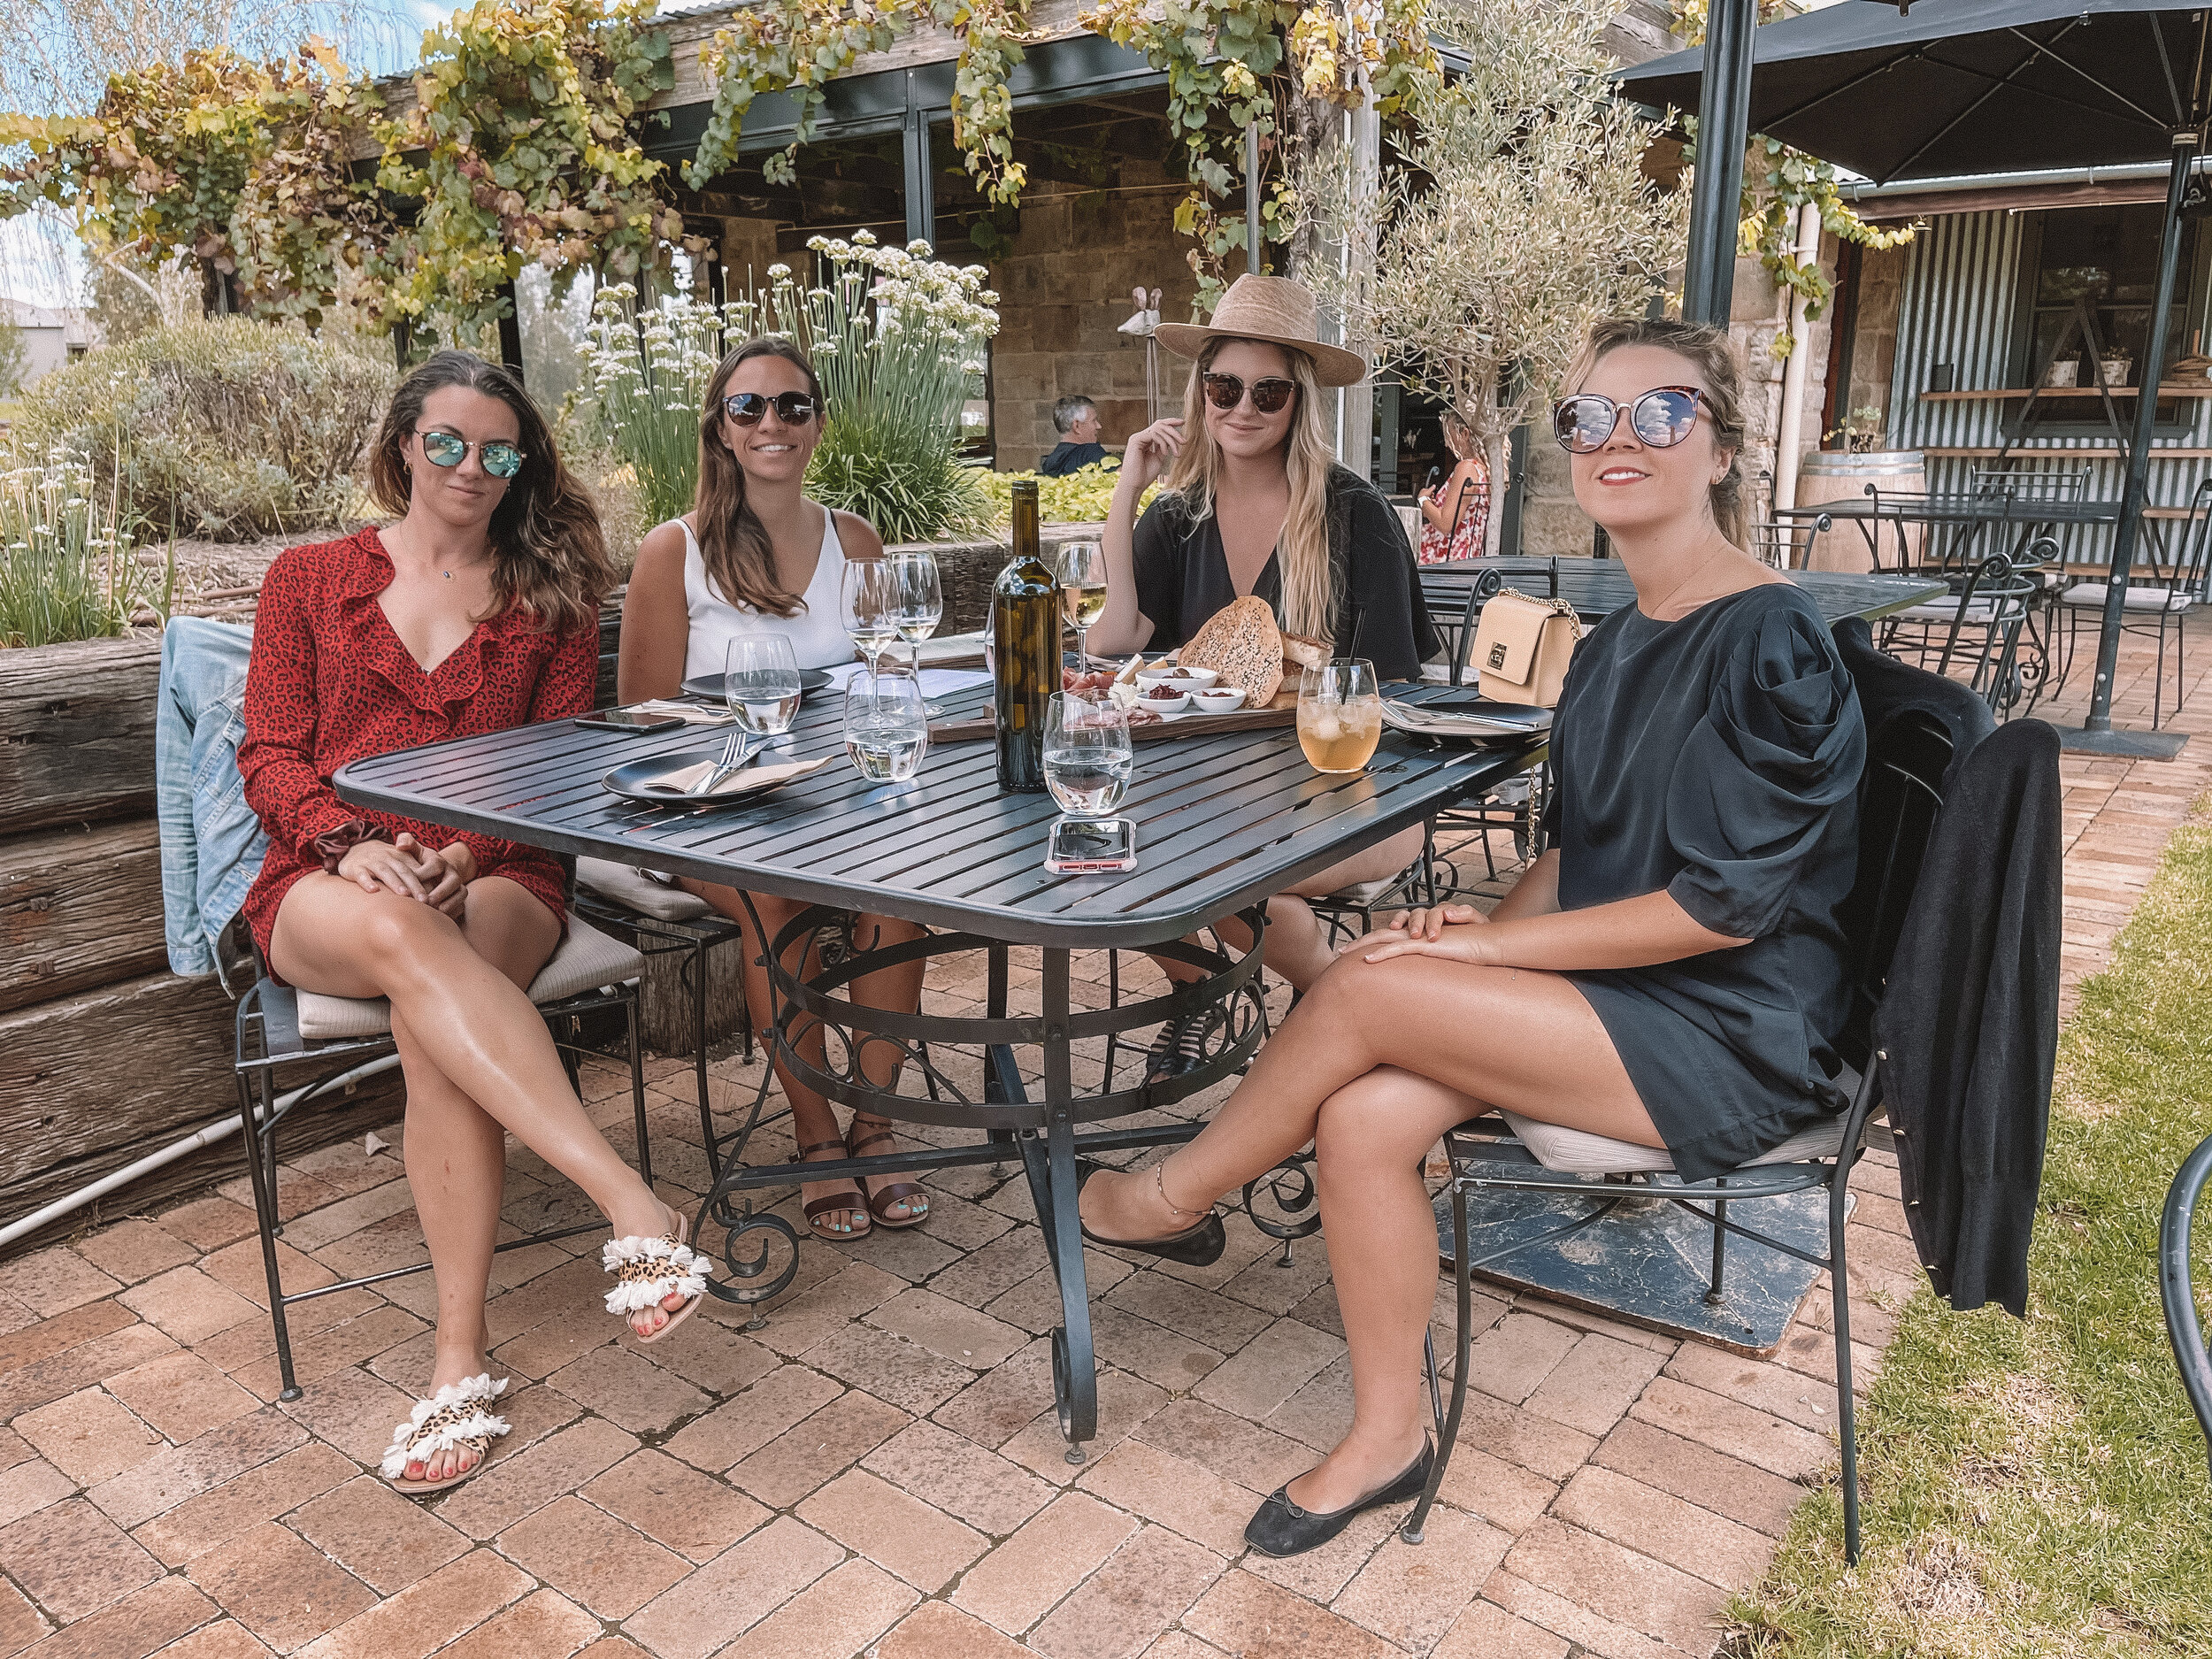 Outdoors terrasse with the girls - Gilbert - Mudgee - New South Wales (NSW) - Australia